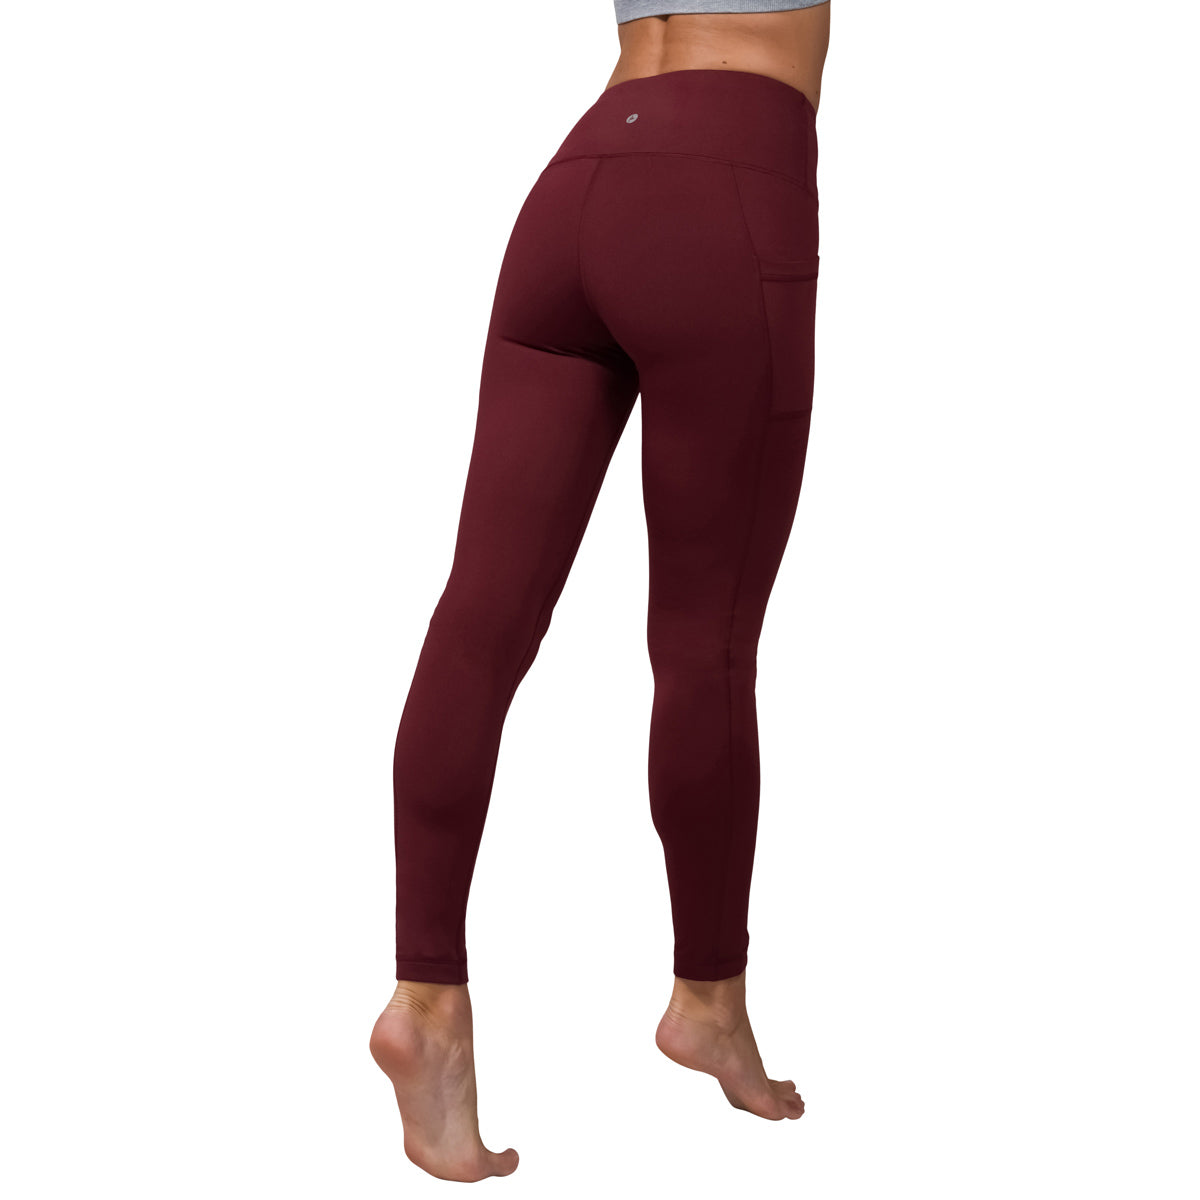 90 Degree by Reflex Leggings Womens Large(29-30) Red Pockets